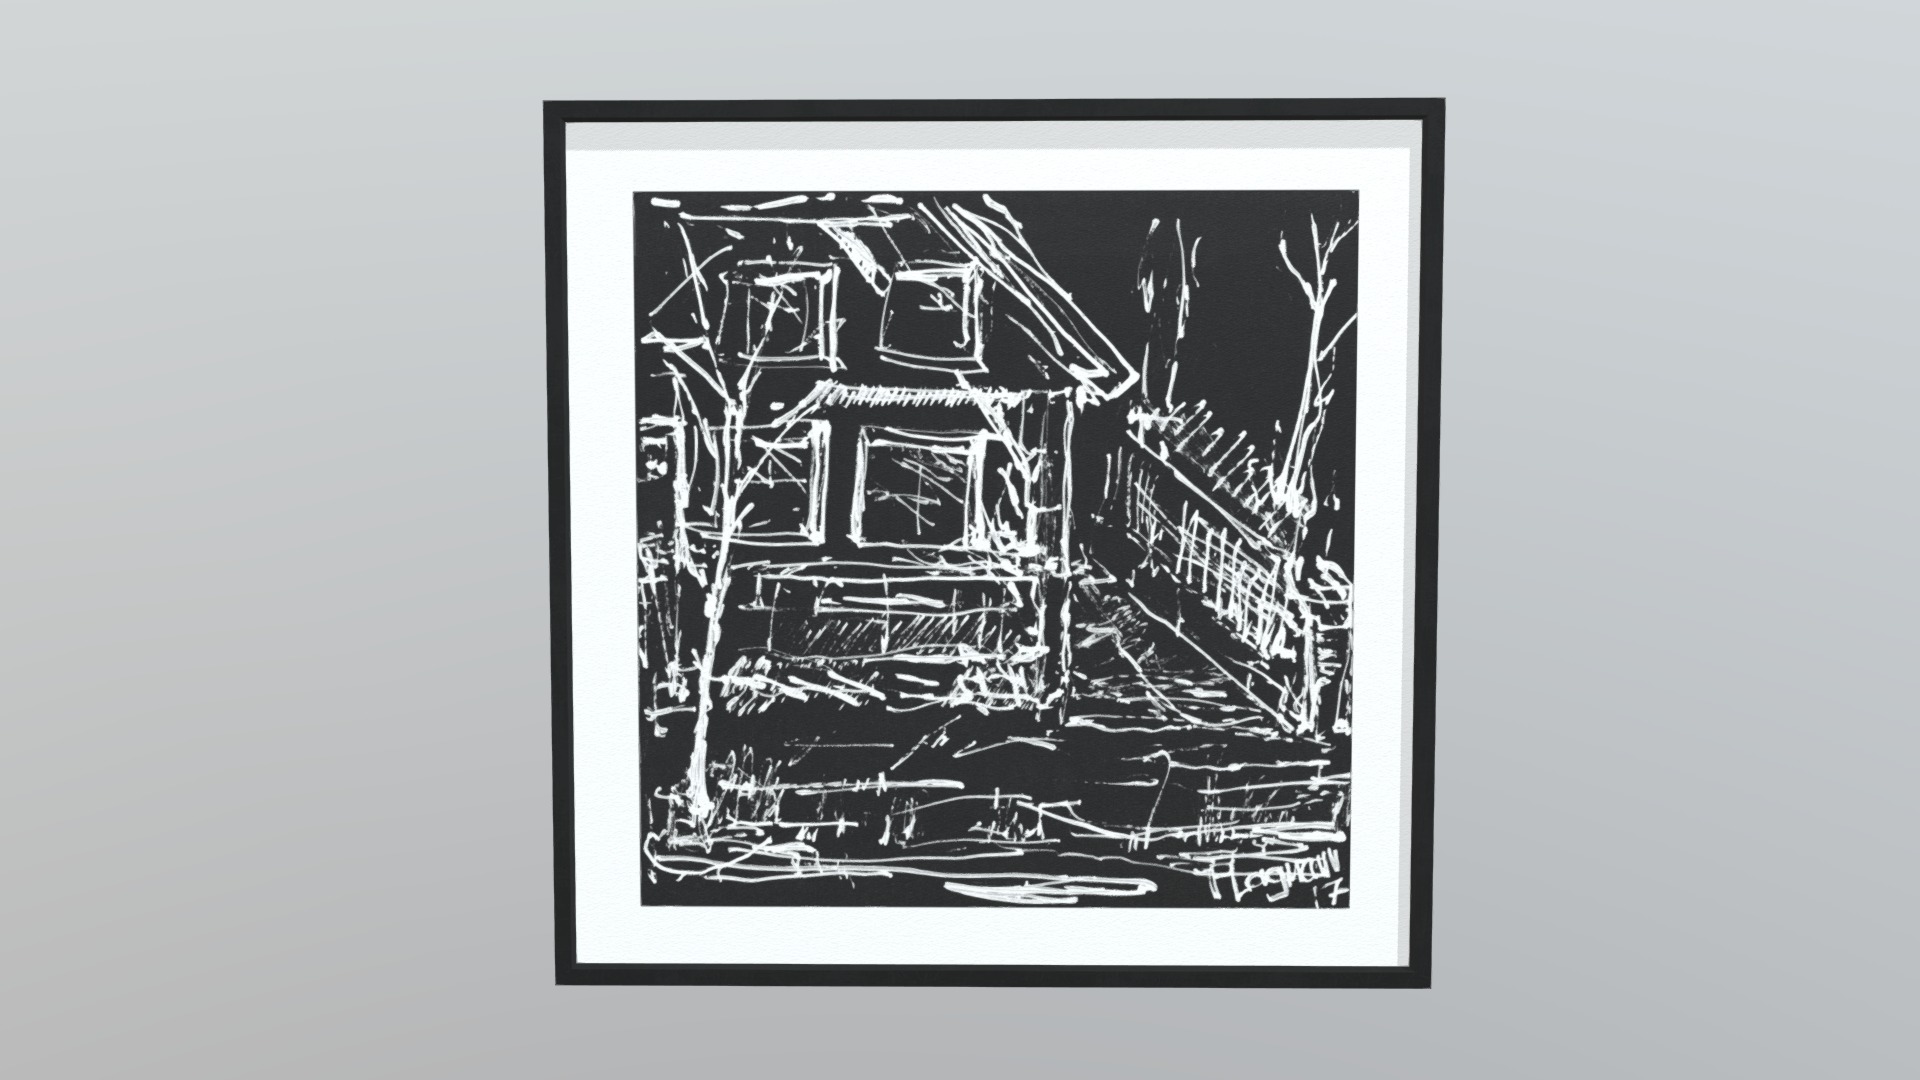 3D model Picture Frame – Untitled #house - This is a 3D model of the Picture Frame - Untitled #house. The 3D model is about a black and white drawing of a blackboard with writing on it.